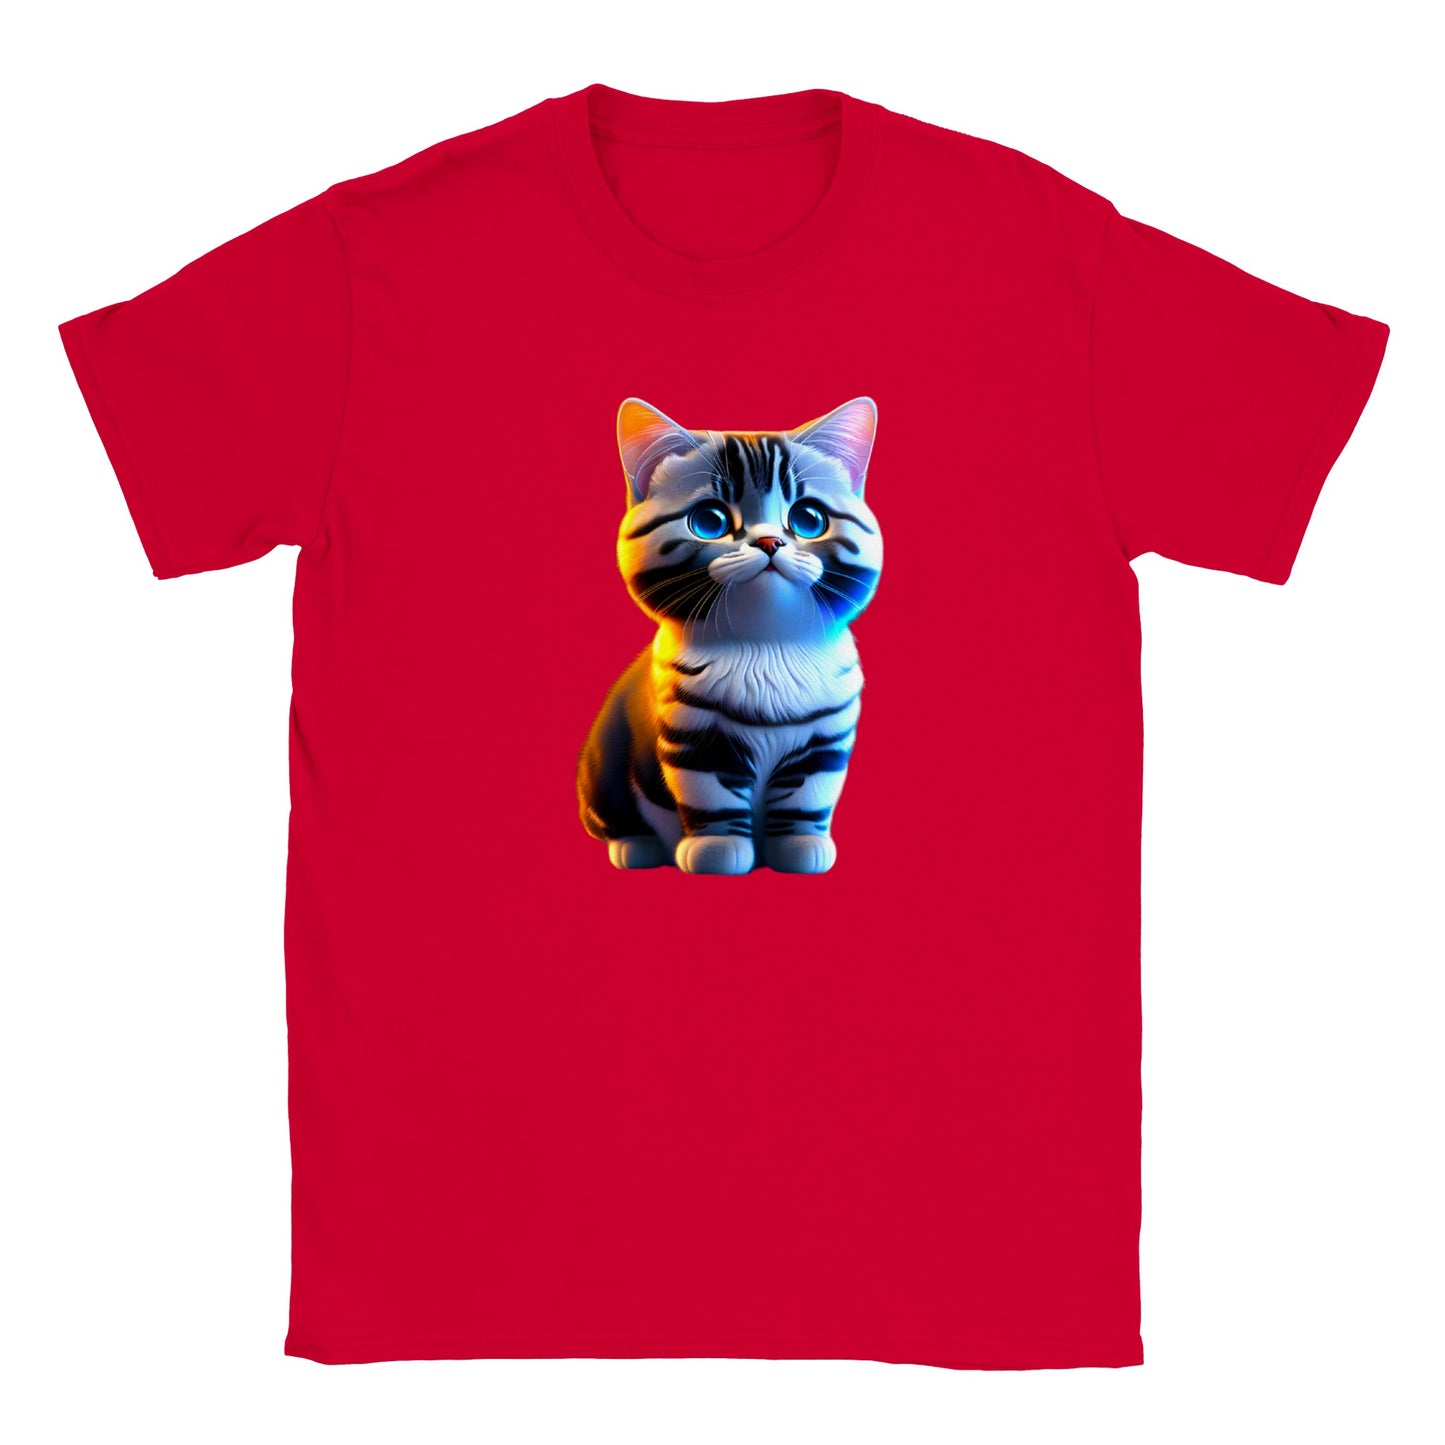 Adorable, Cool, Cute Cats and Kittens Toy - Classic Kids Crewneck T-Shirt 28